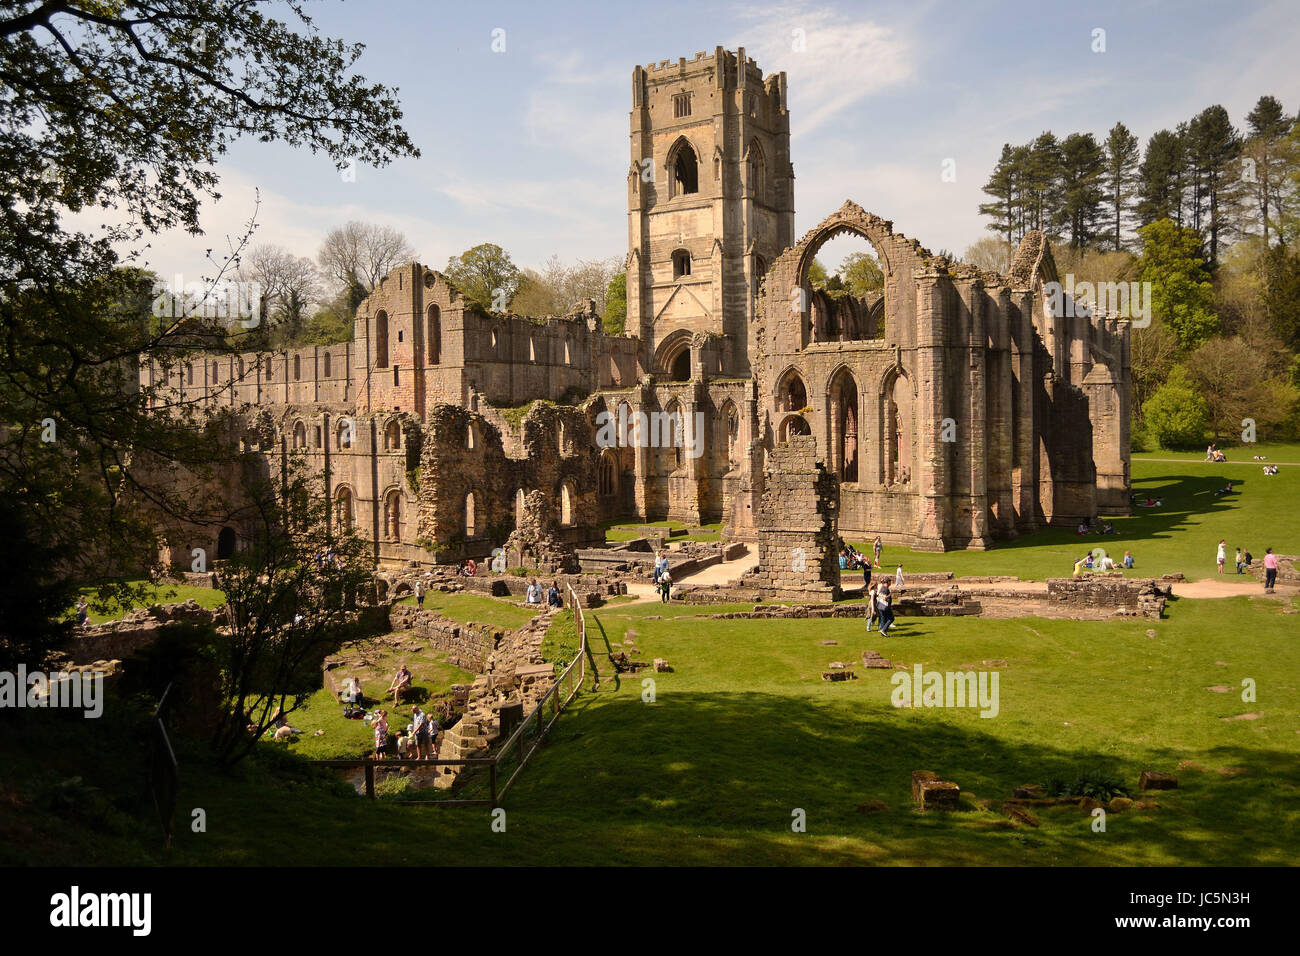 Fountains Abbey, National Trust site, North Yorkshire Foto de stock